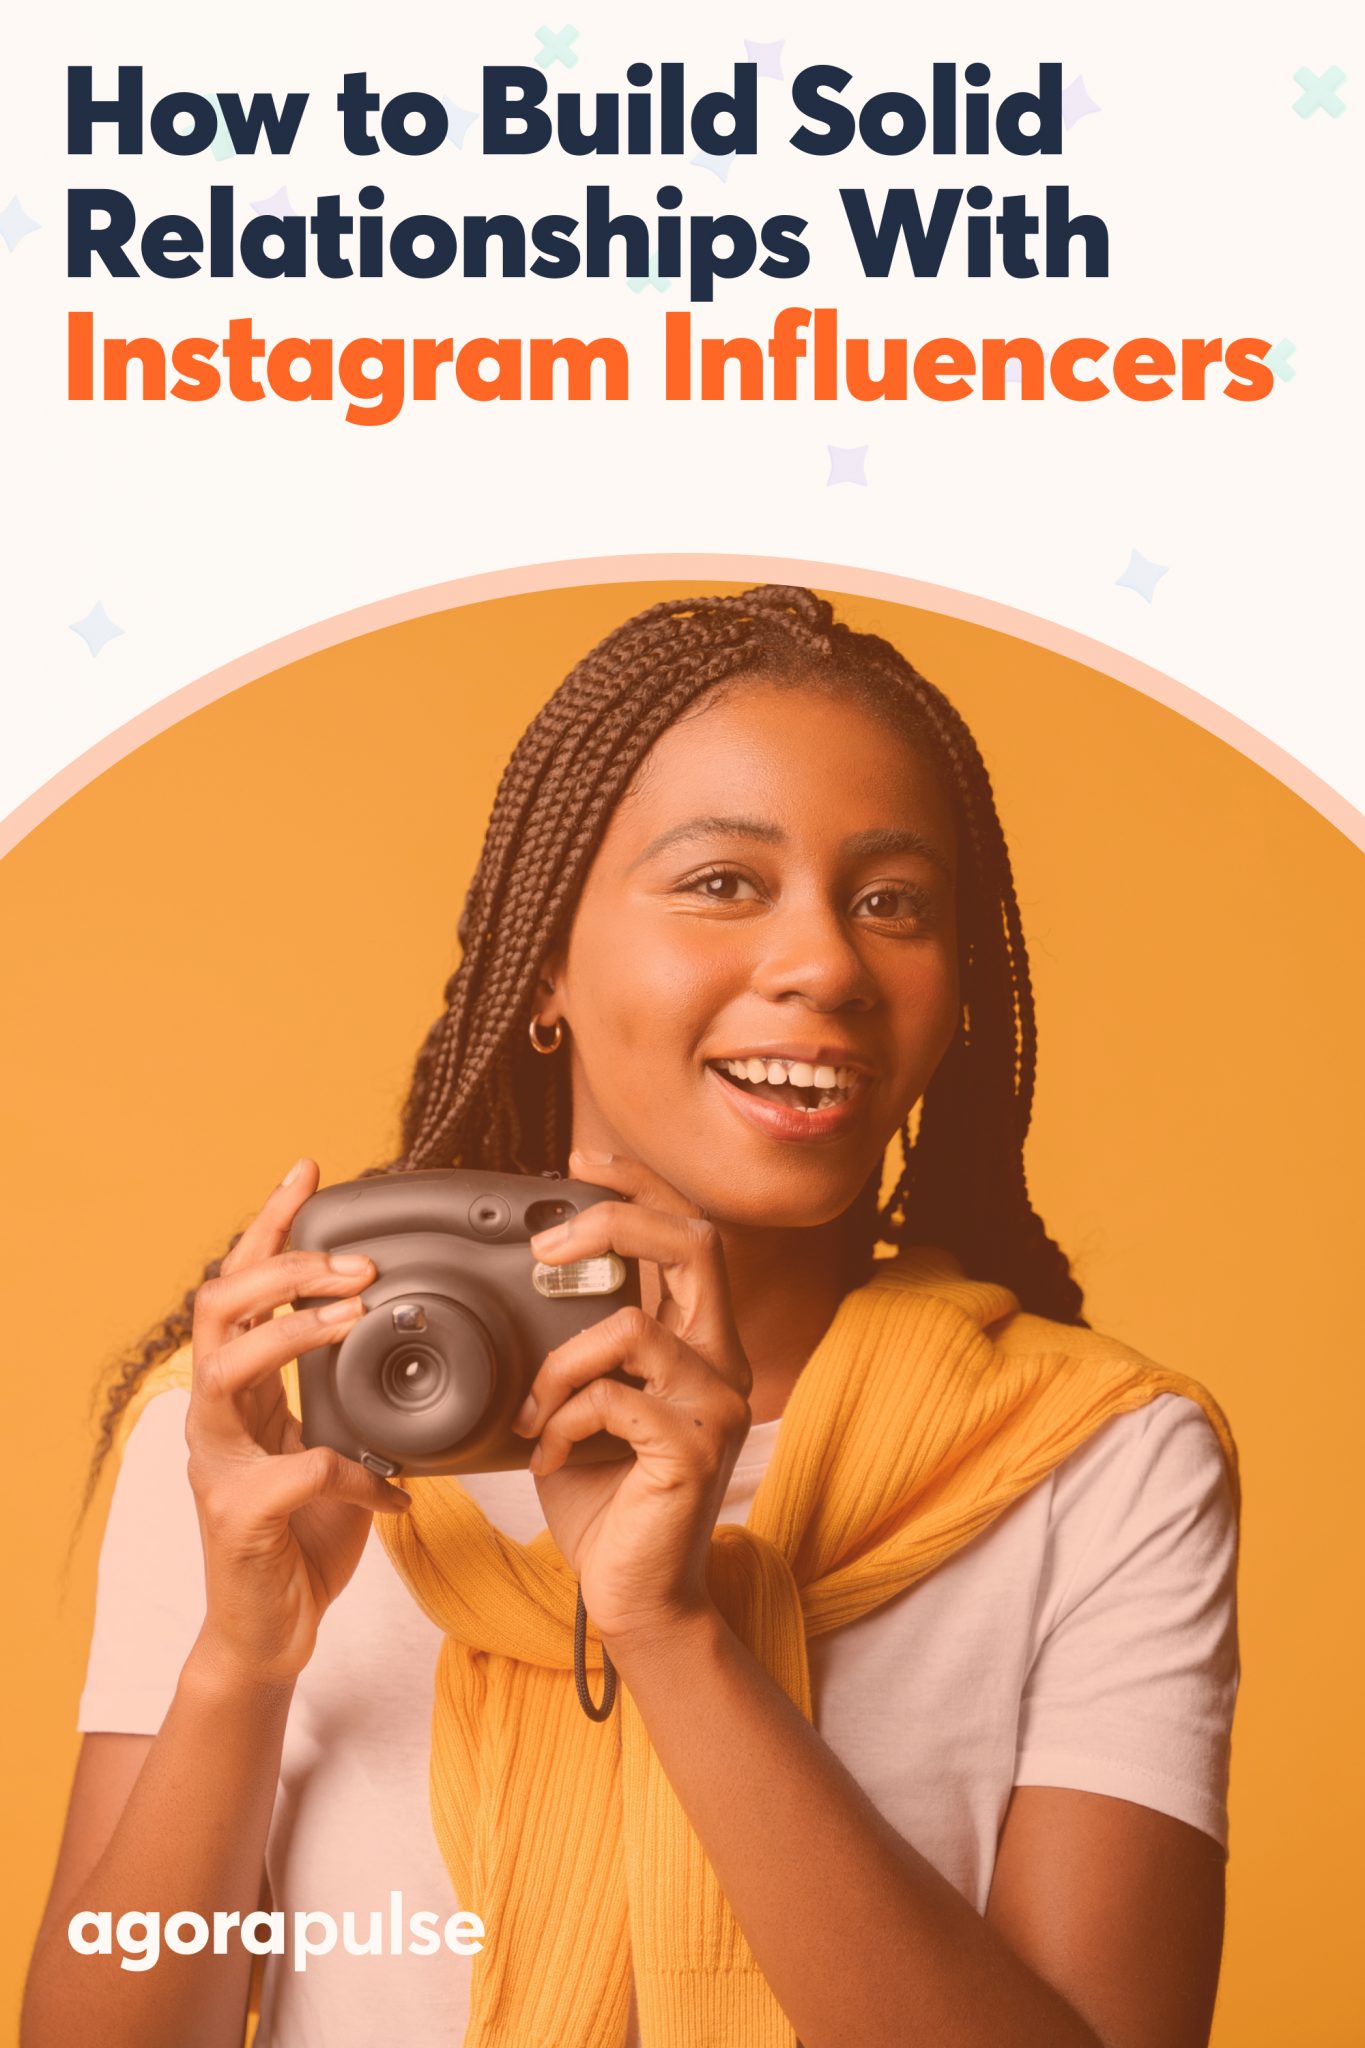 5 Common Sense Tips to Build Successful Relationships With Instagram Influencers